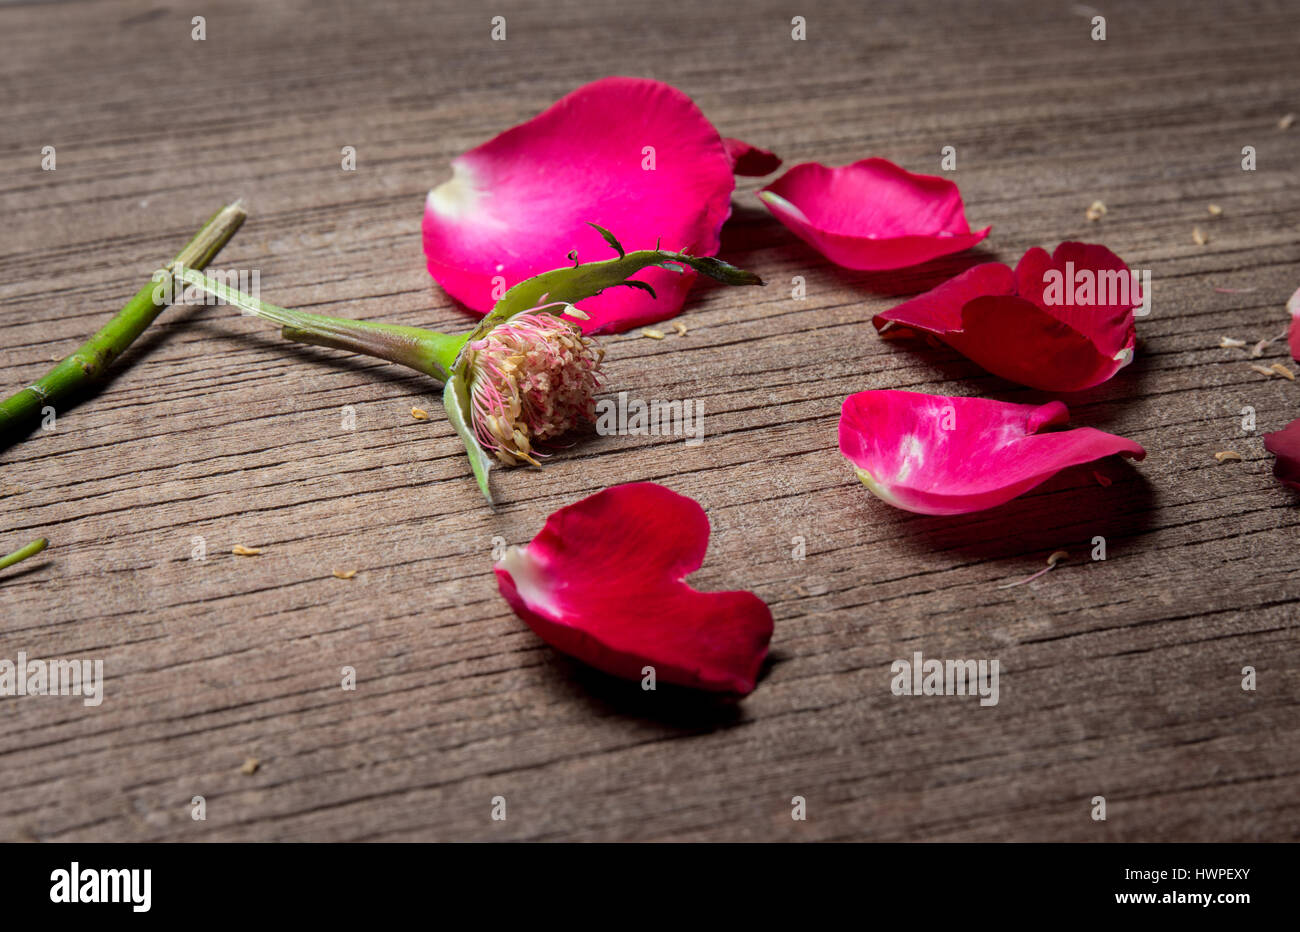 Red Rose Broken Heart High Resolution Stock Photography and Images - Alamy